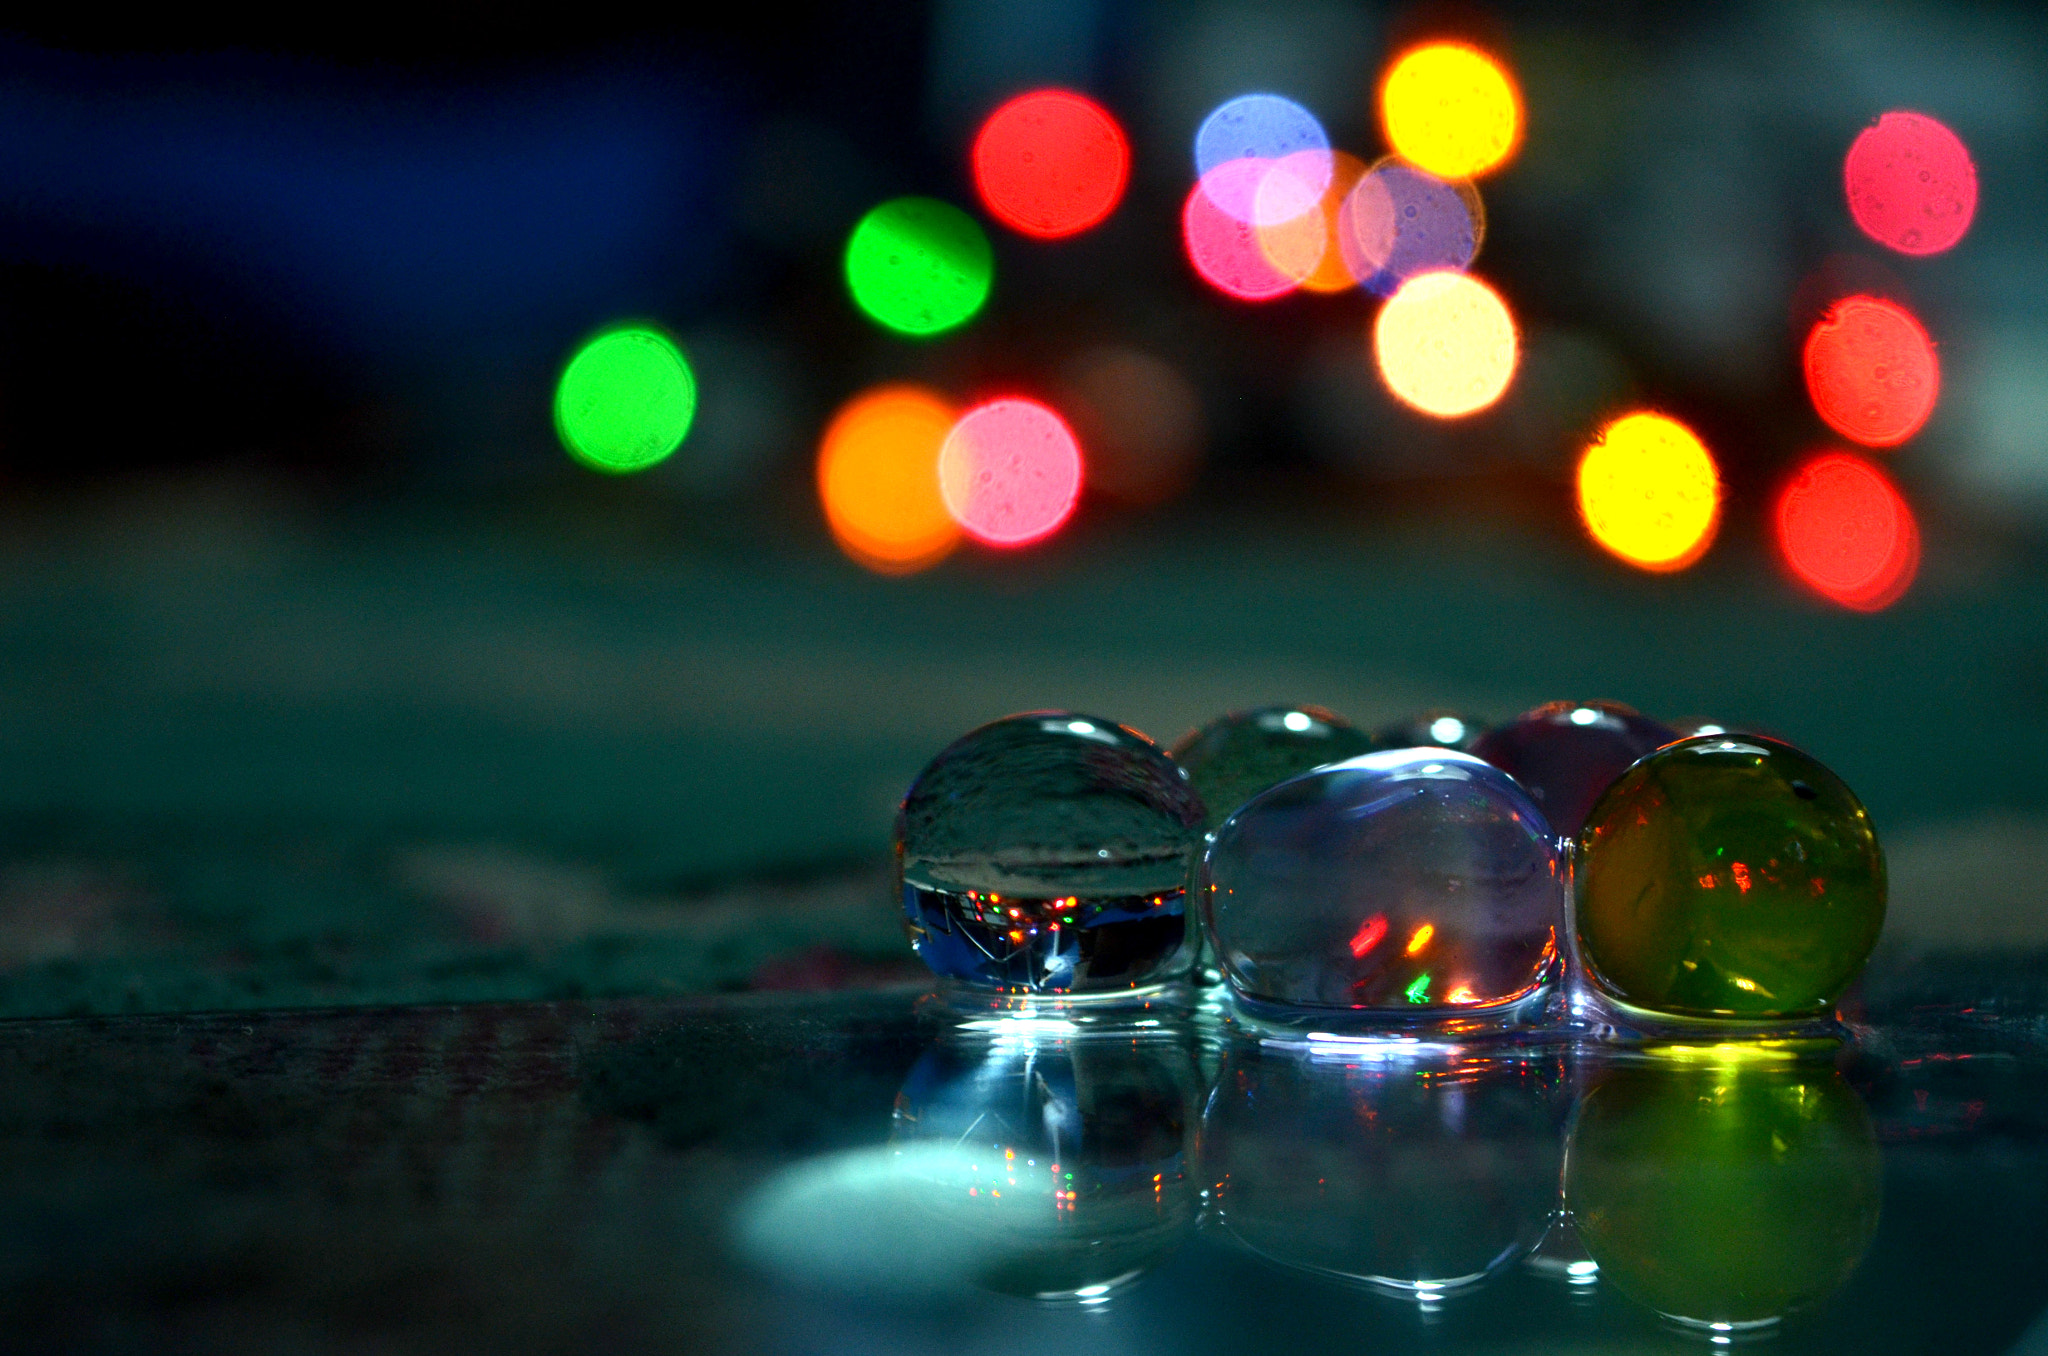 Nikon D5100 sample photo. The shinning marbles photography